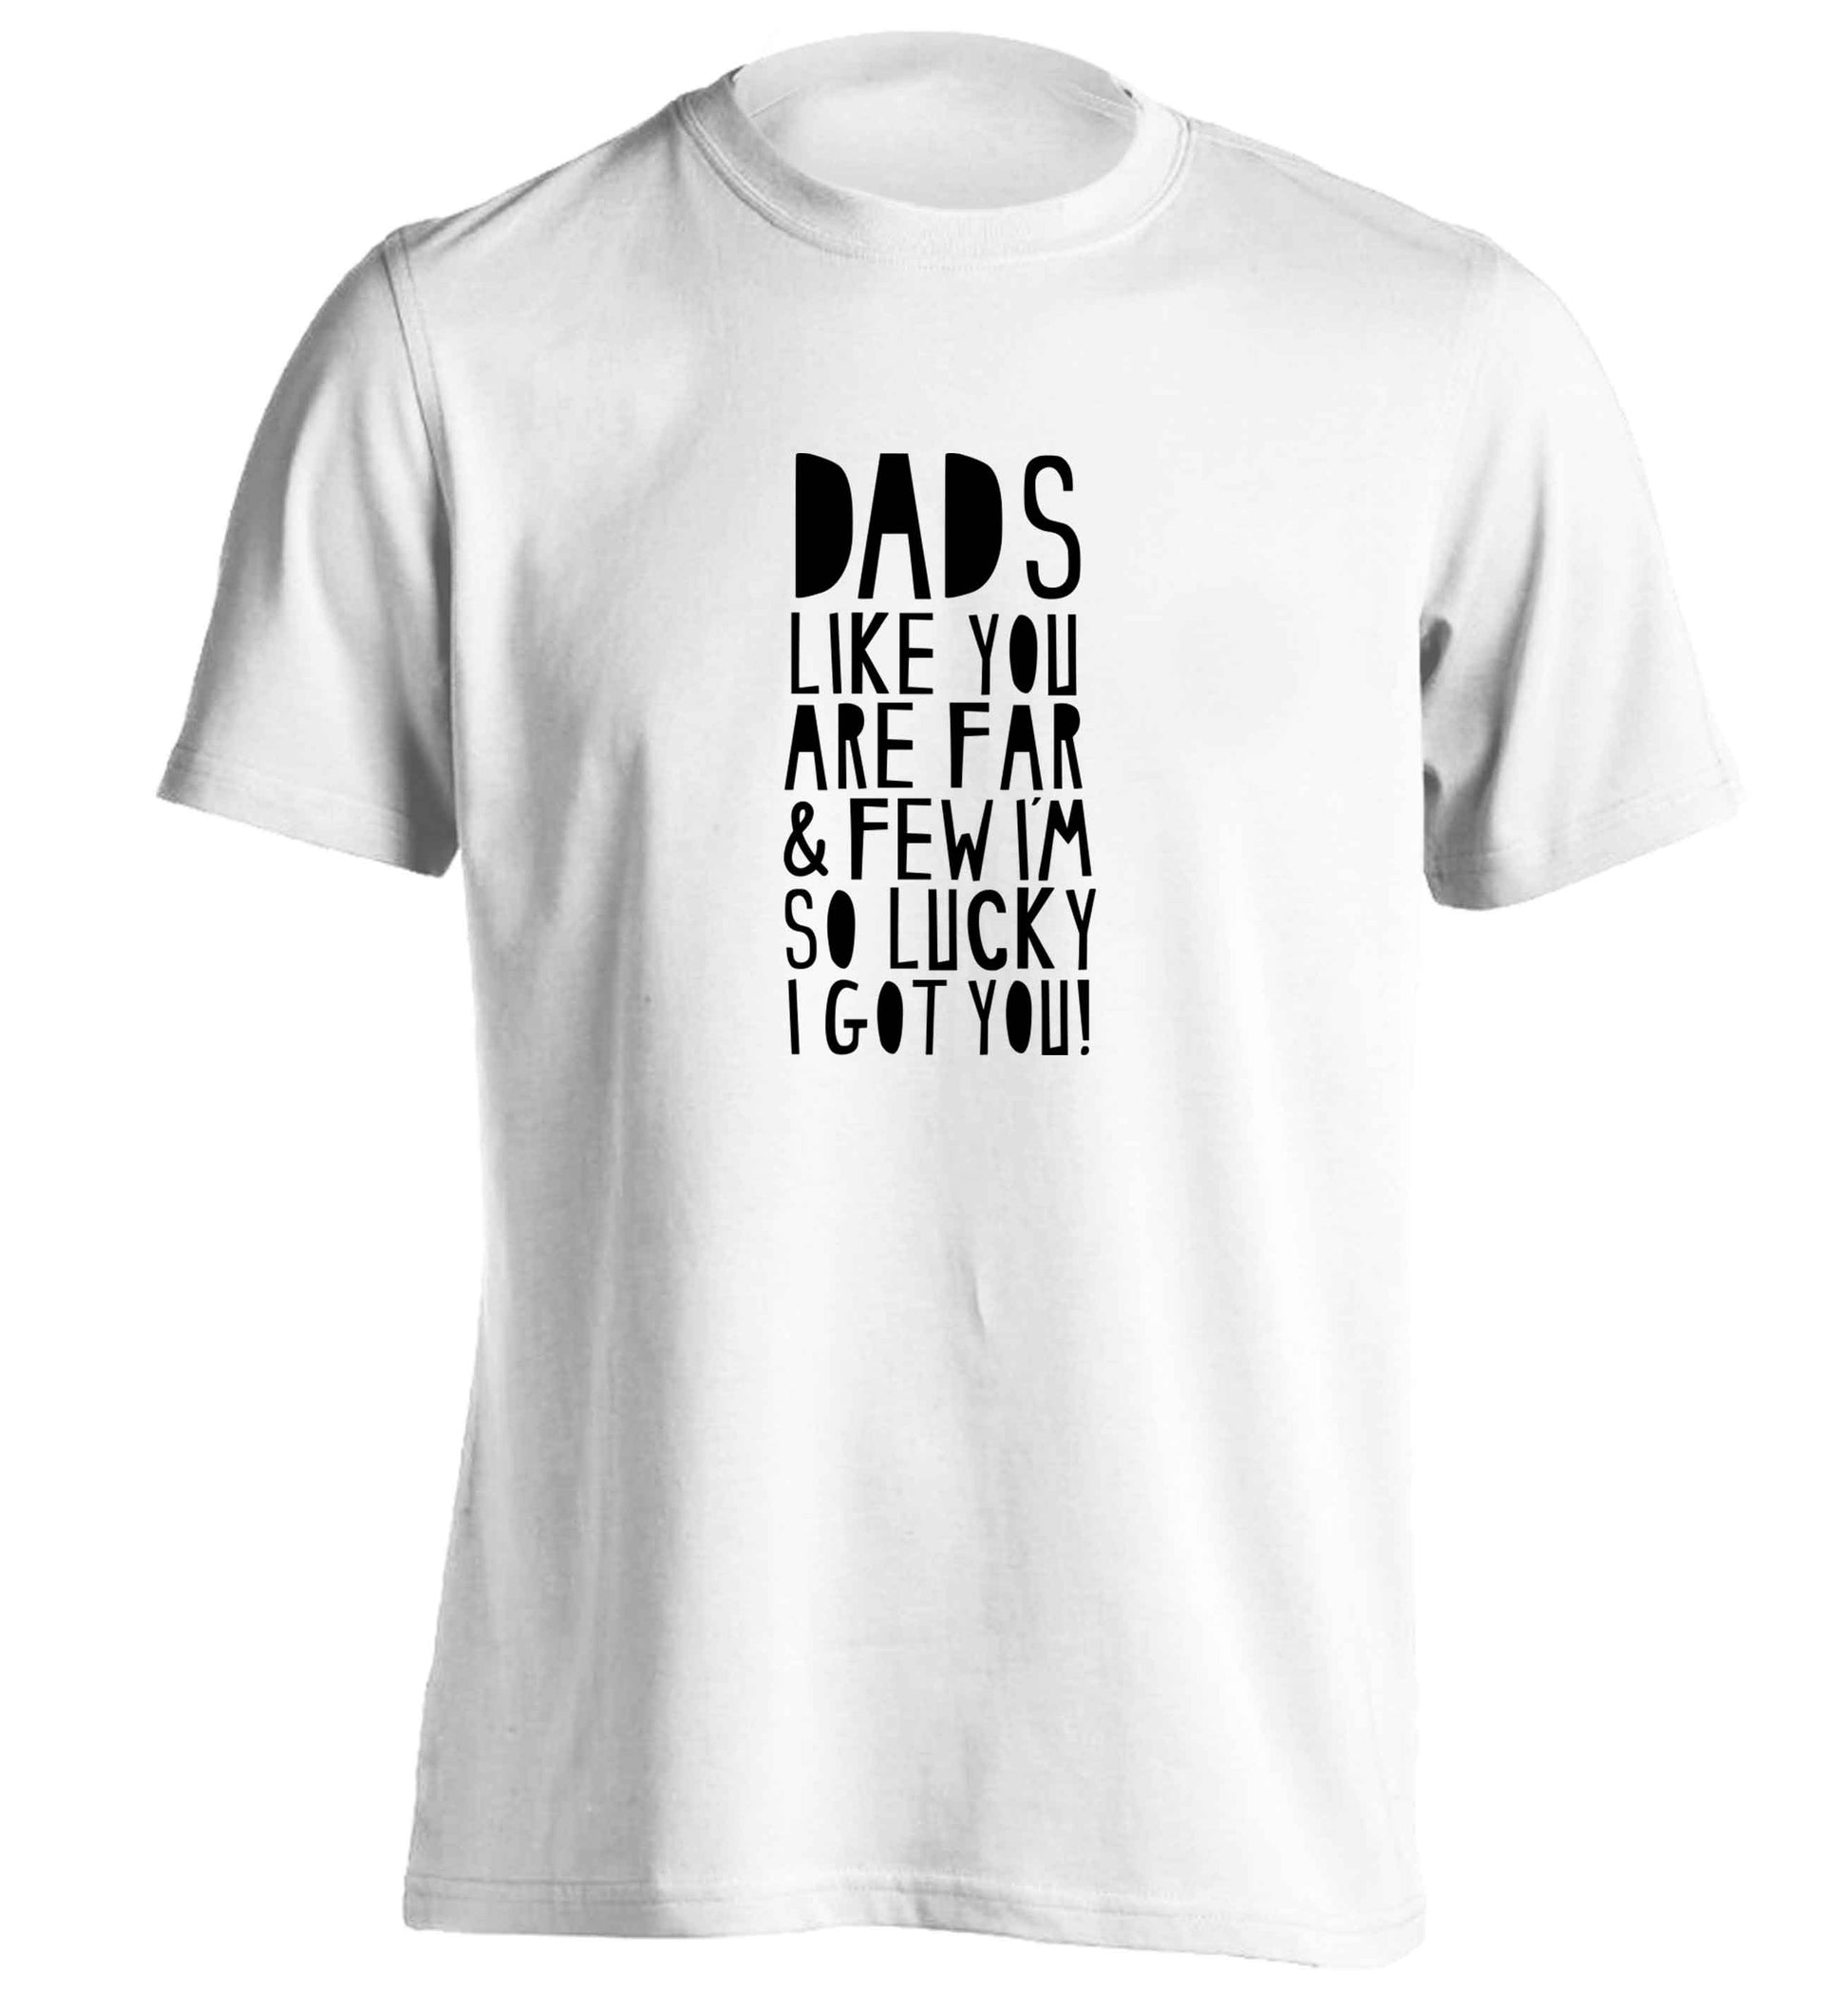 Dads like you are far and few I'm so luck I got you! adults unisex white Tshirt 2XL